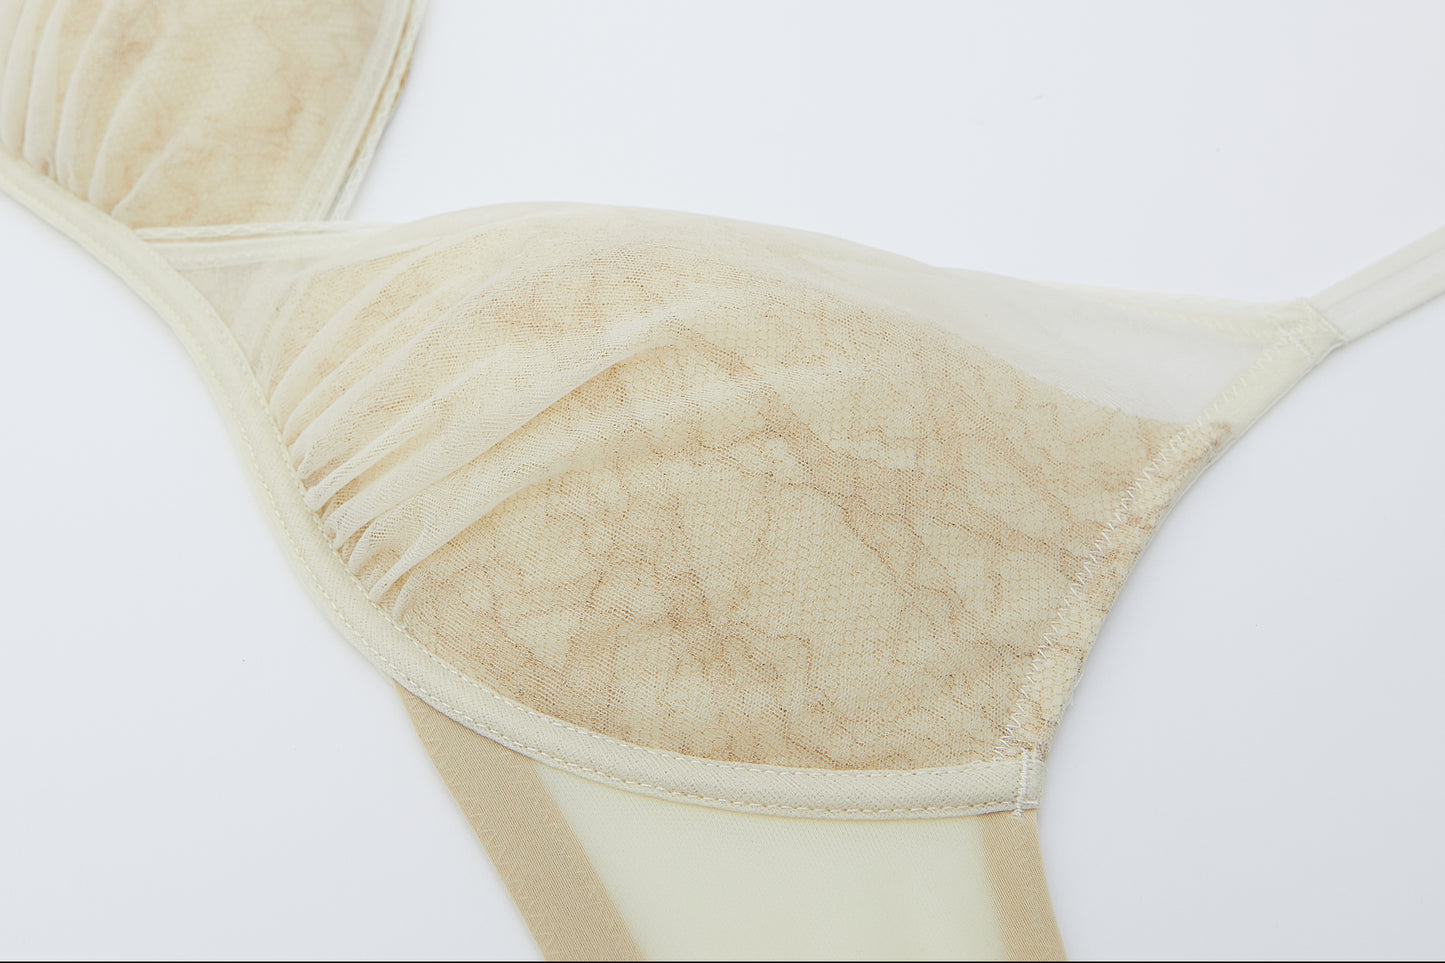 Close-up of material of lace bra